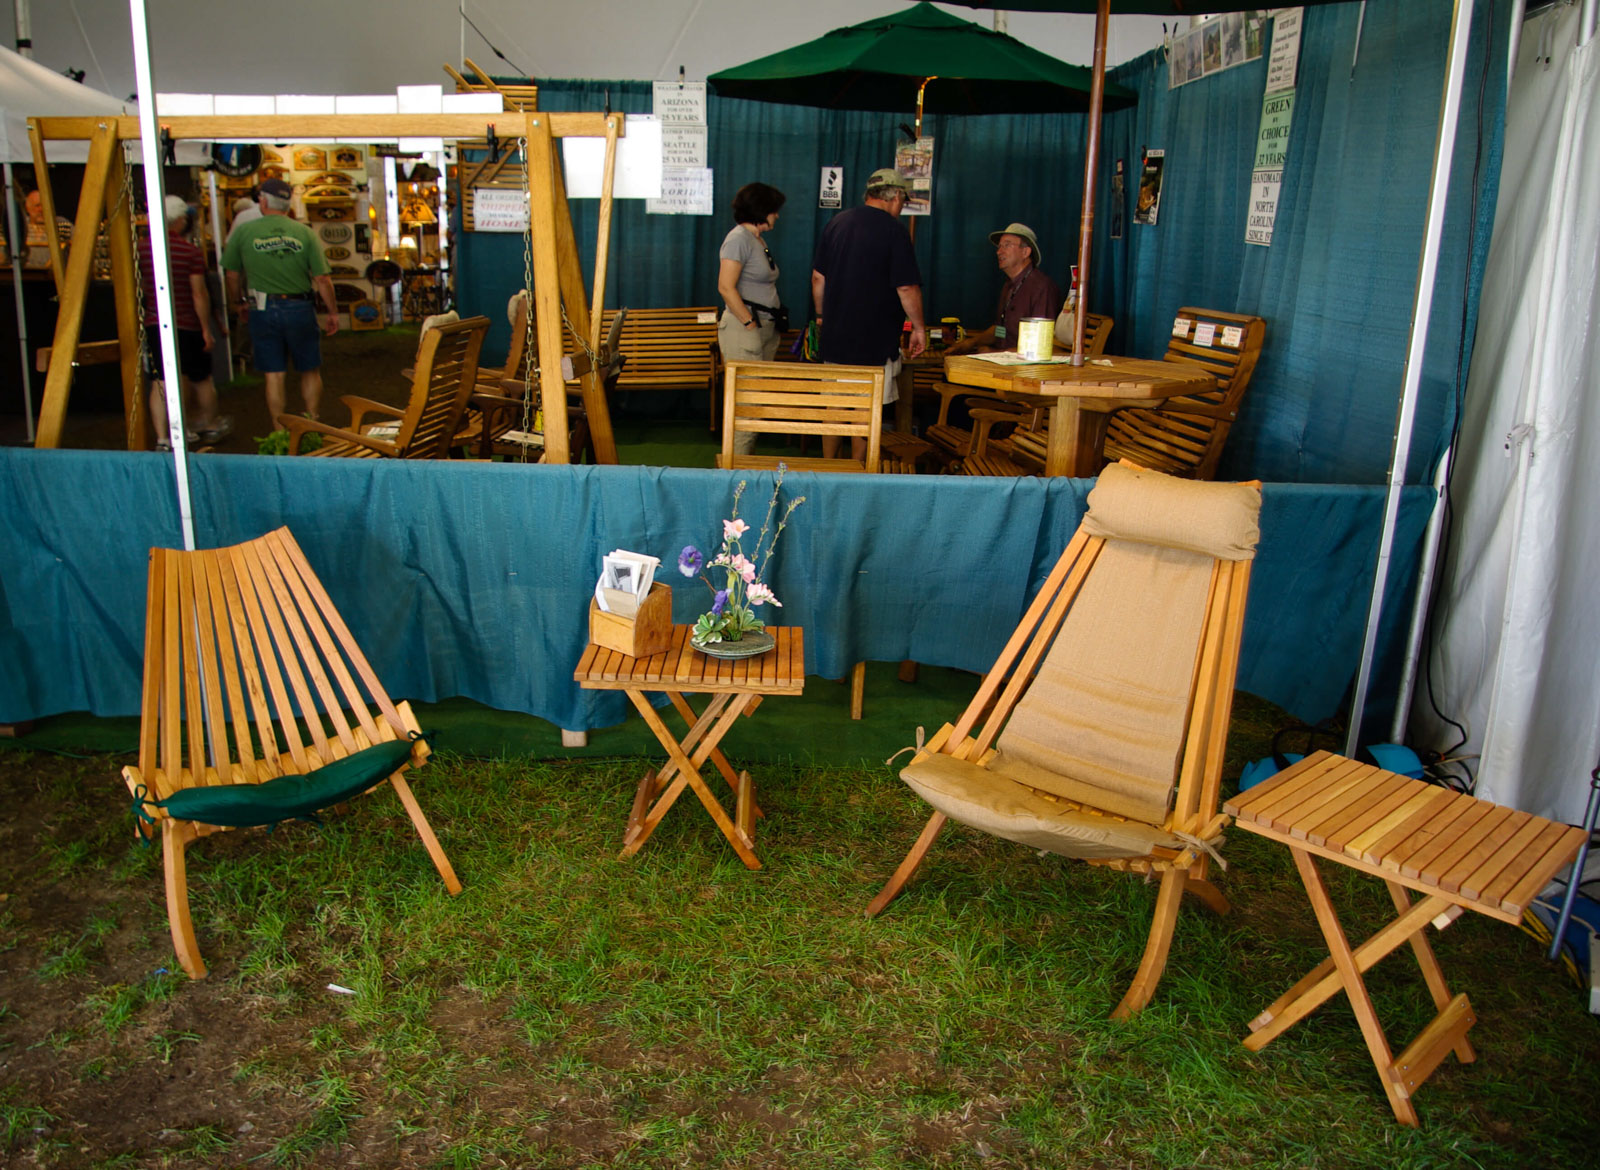 Handmade Country Chairs at the Woodstock-New Paltz Art & Crafts Fair